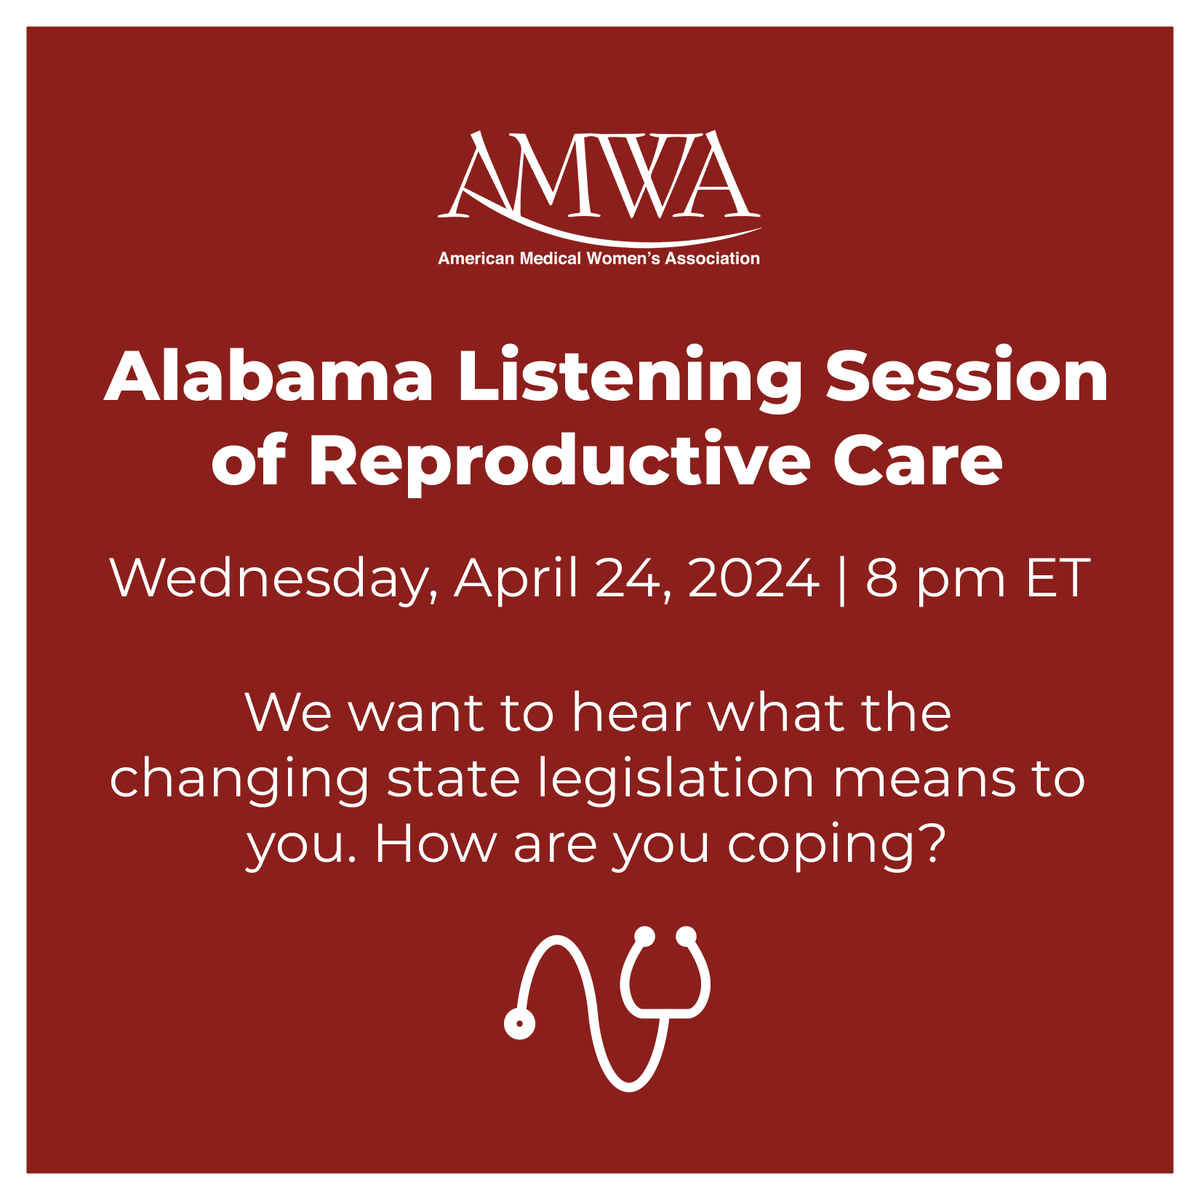 AMWA advocates for access to quality healthcare for all. Reproductive care is healthcare. We applaud those who are dedicated to meeting patient needs. Share your thoughts at a Listening Session Wed APRIL 24 at 8pm ET: bit.ly/3wGAvNa #HealthCareForAll #WomenInMedicine